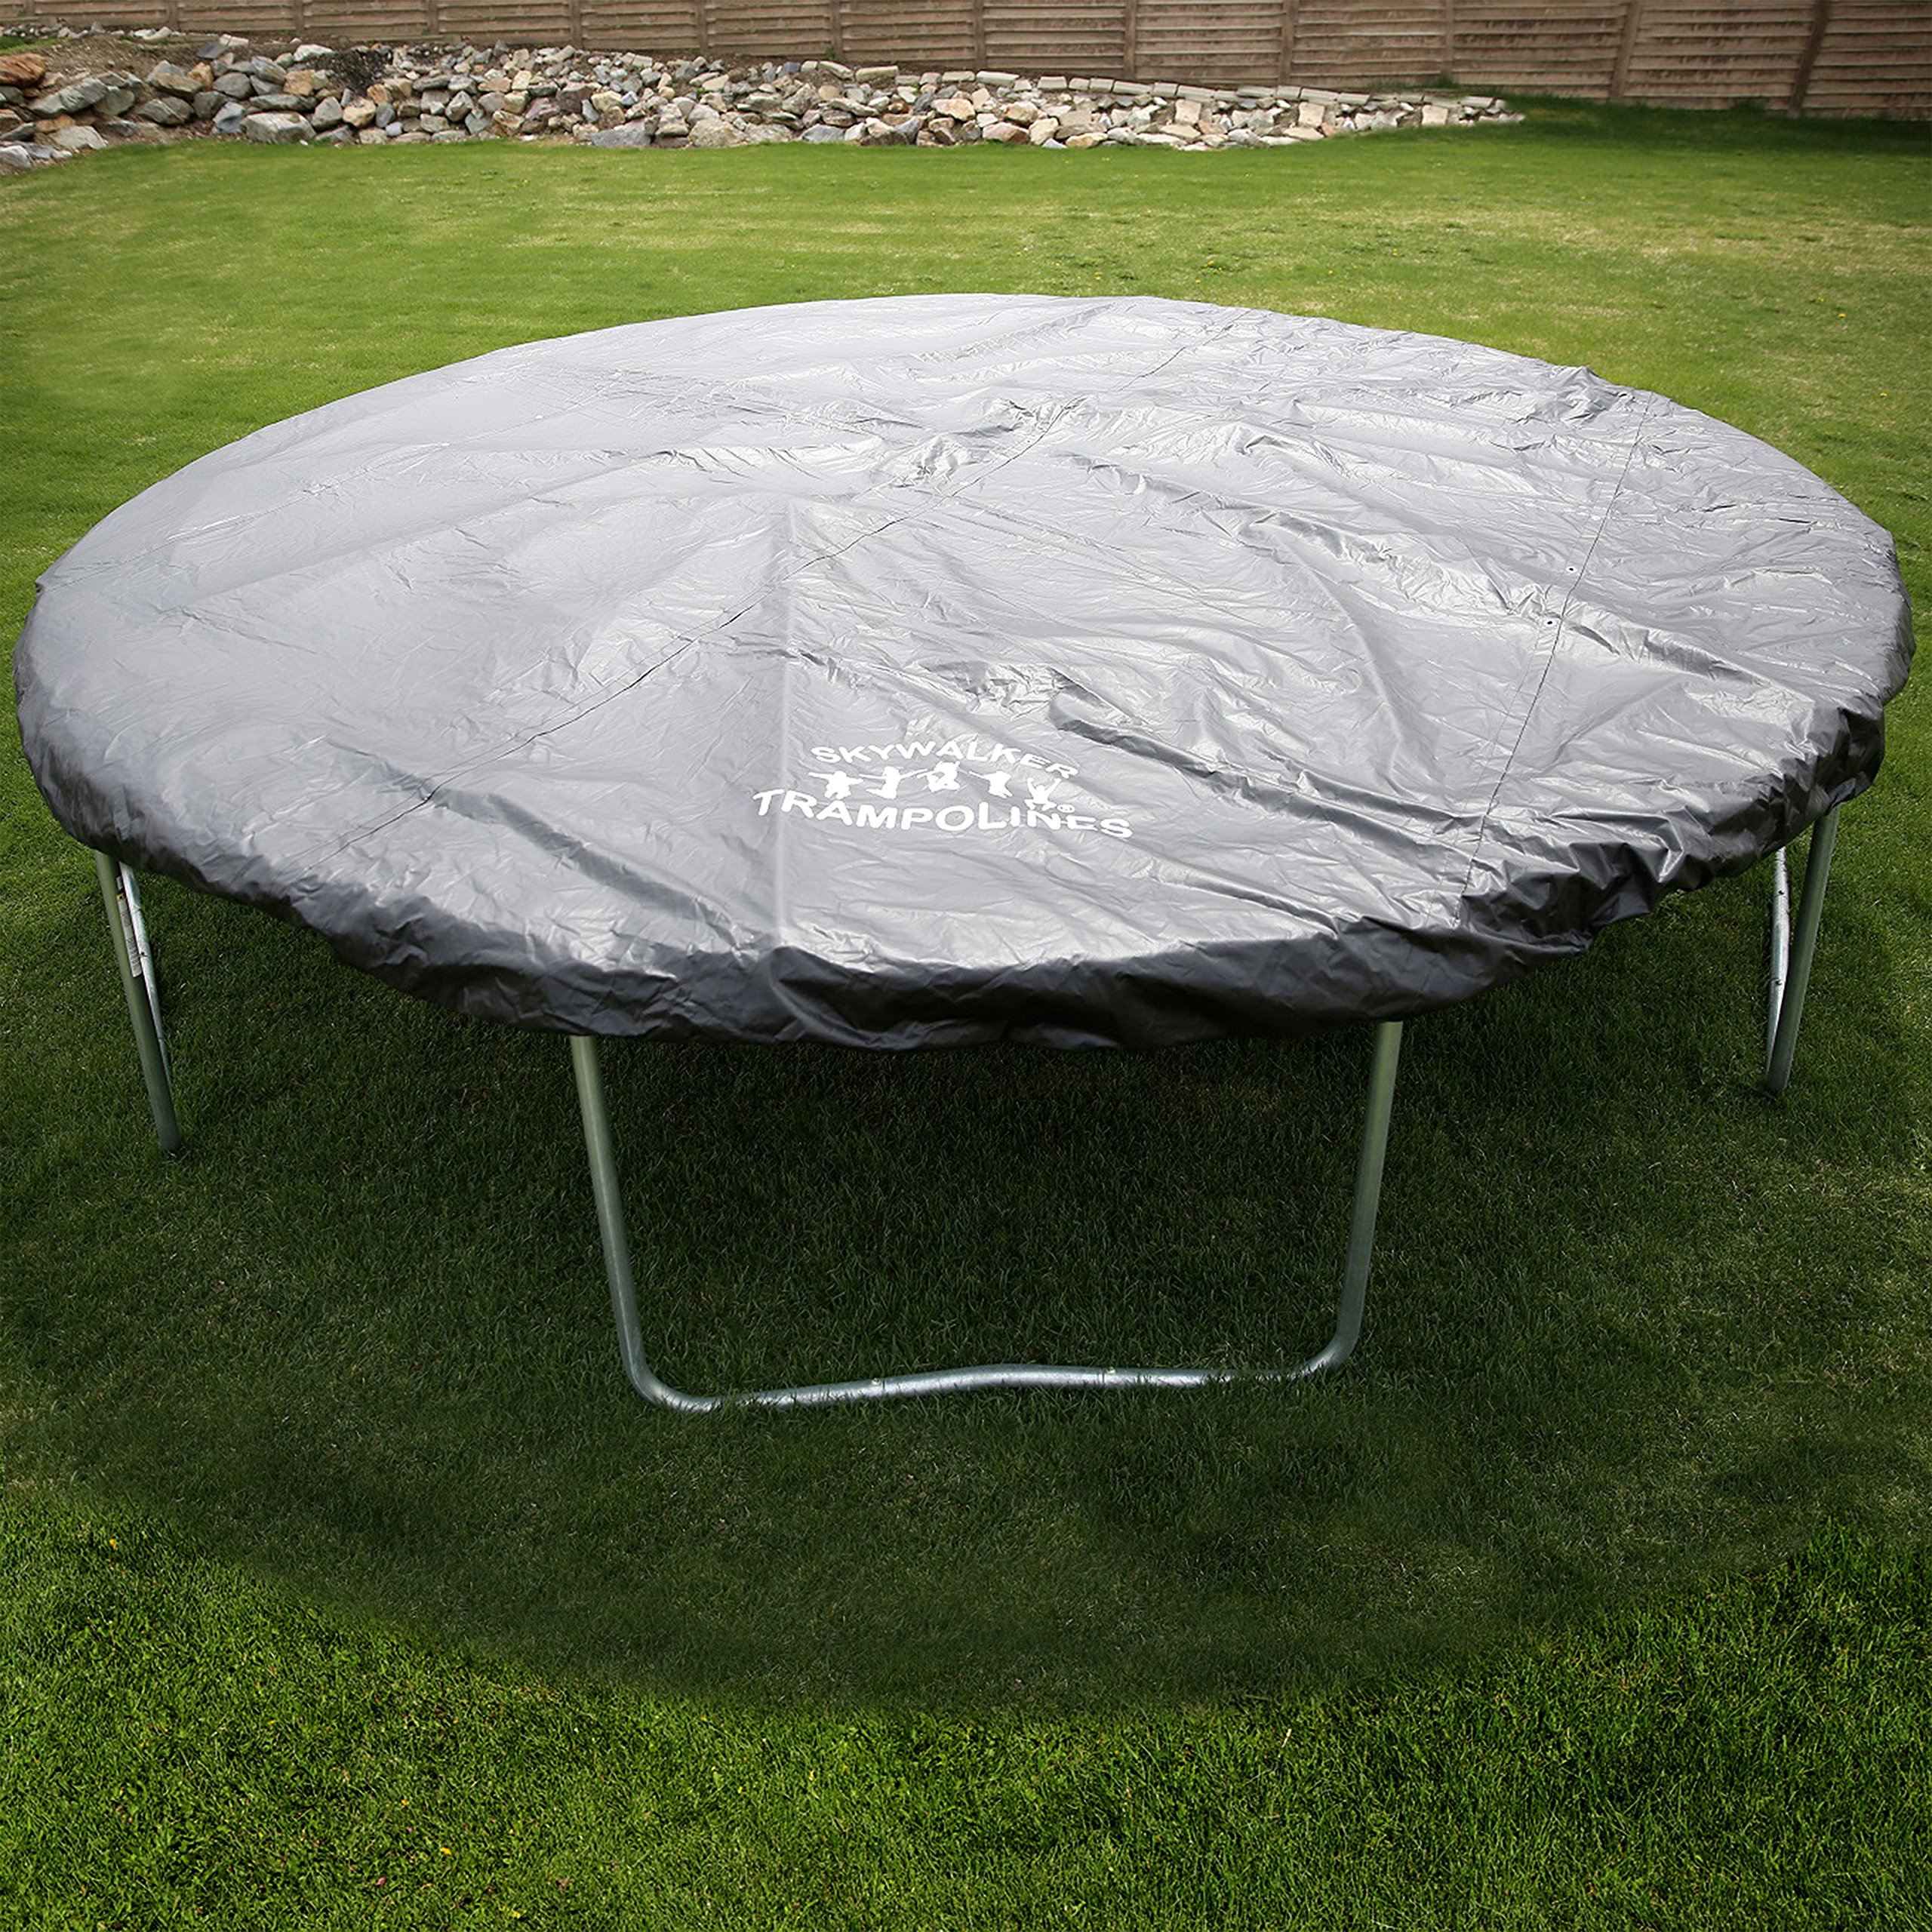 Skywalker Trampolines Accessory Weather cover - 12 Round